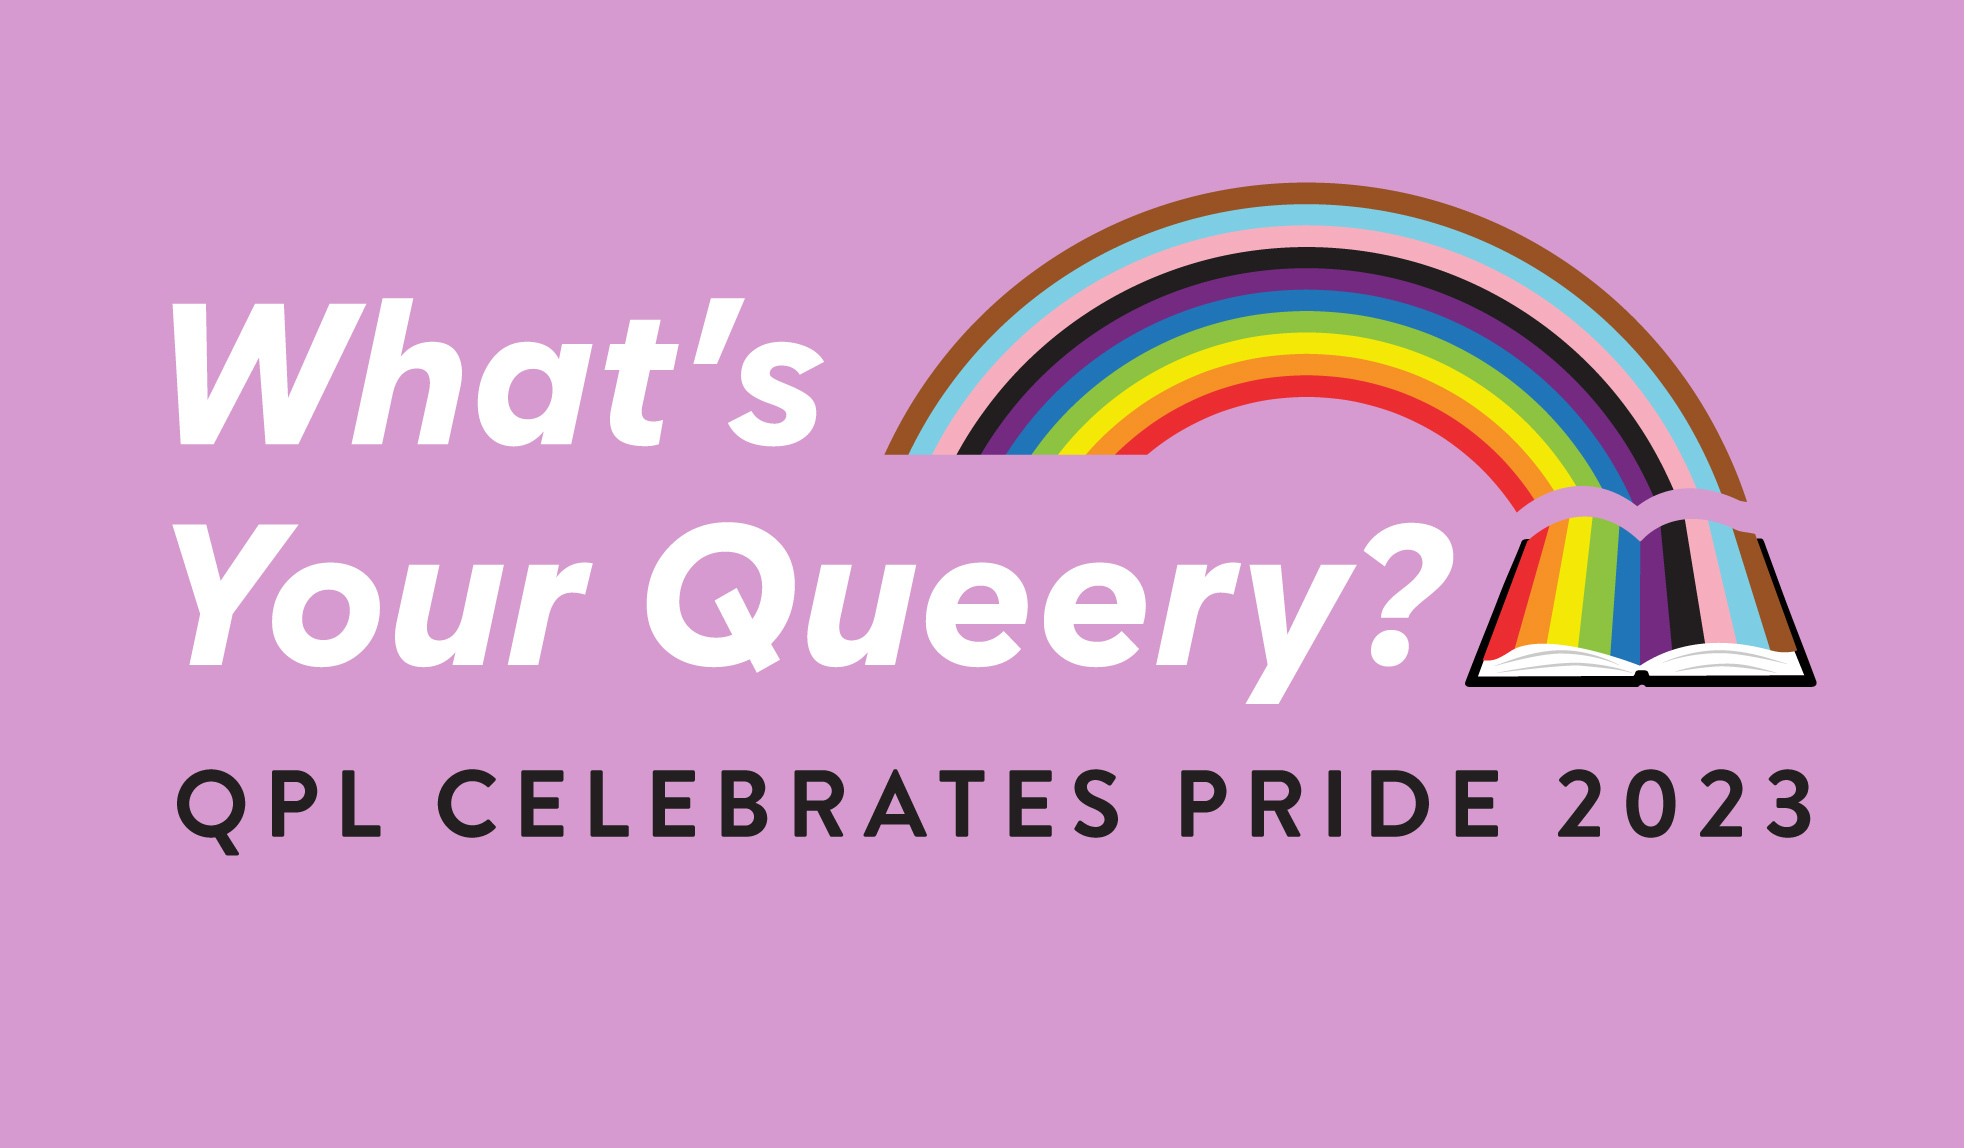 Come to the Library and let us know: What's Your Queery?